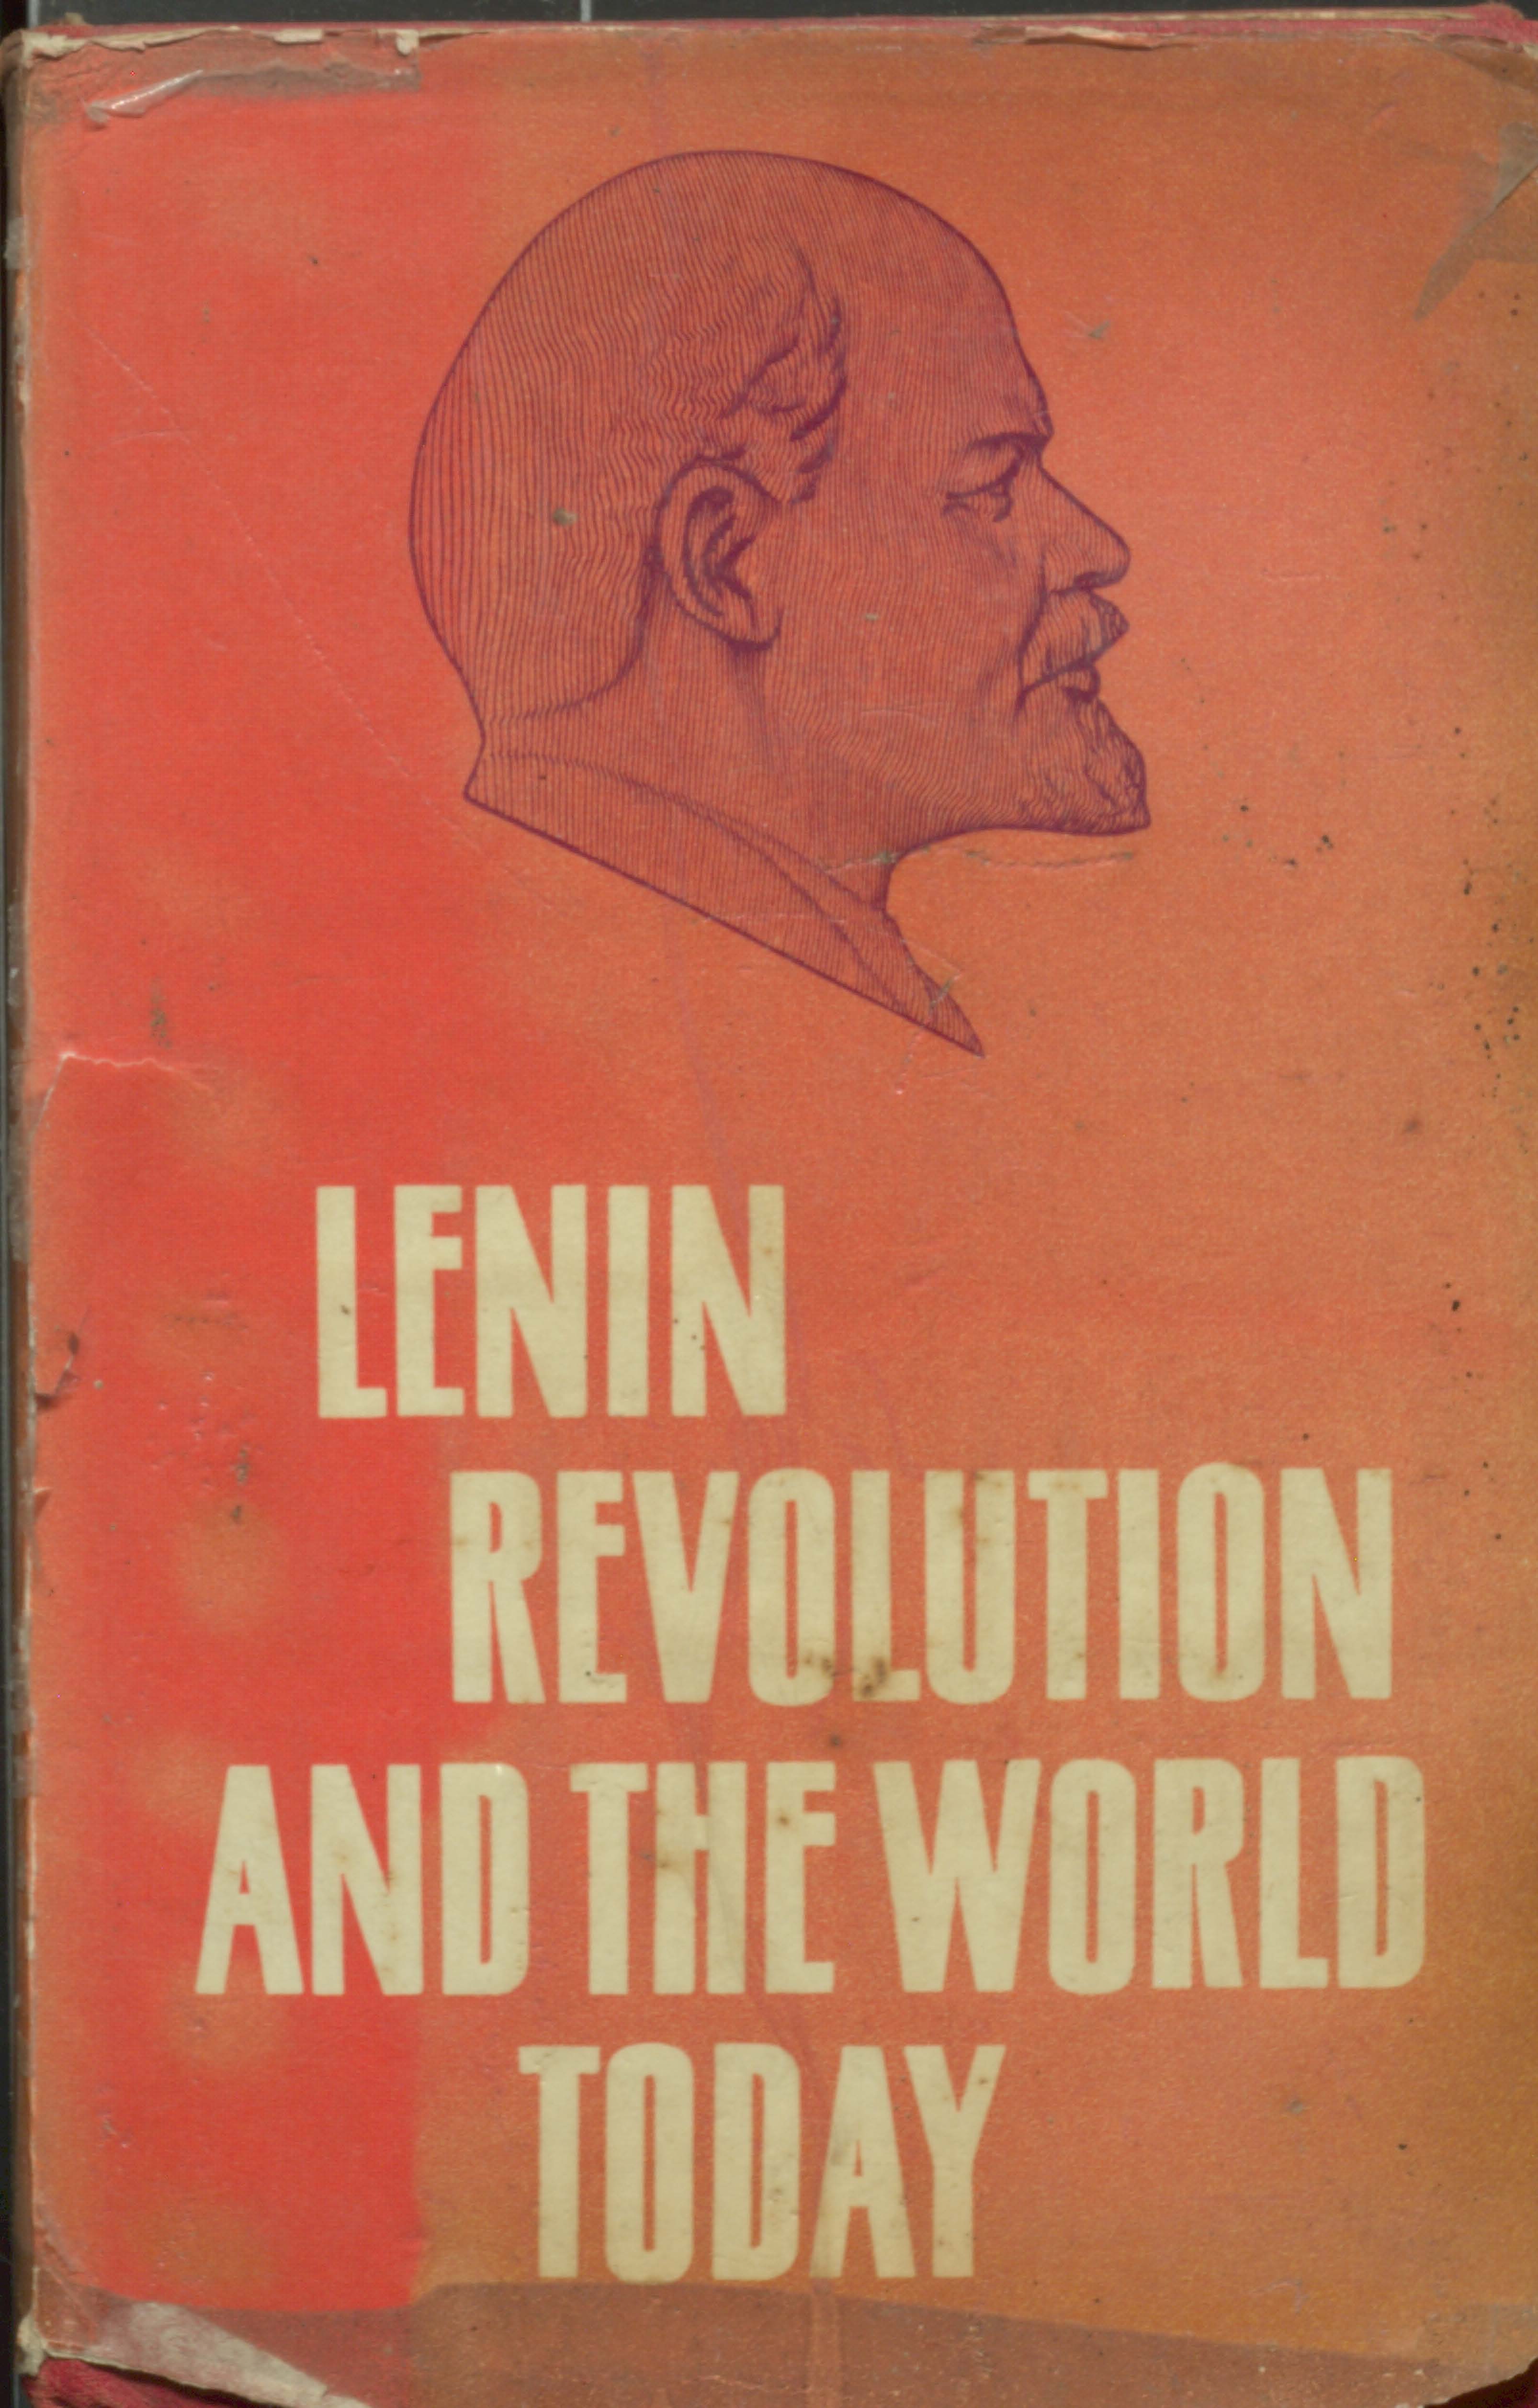 Lenin revolution and the world today